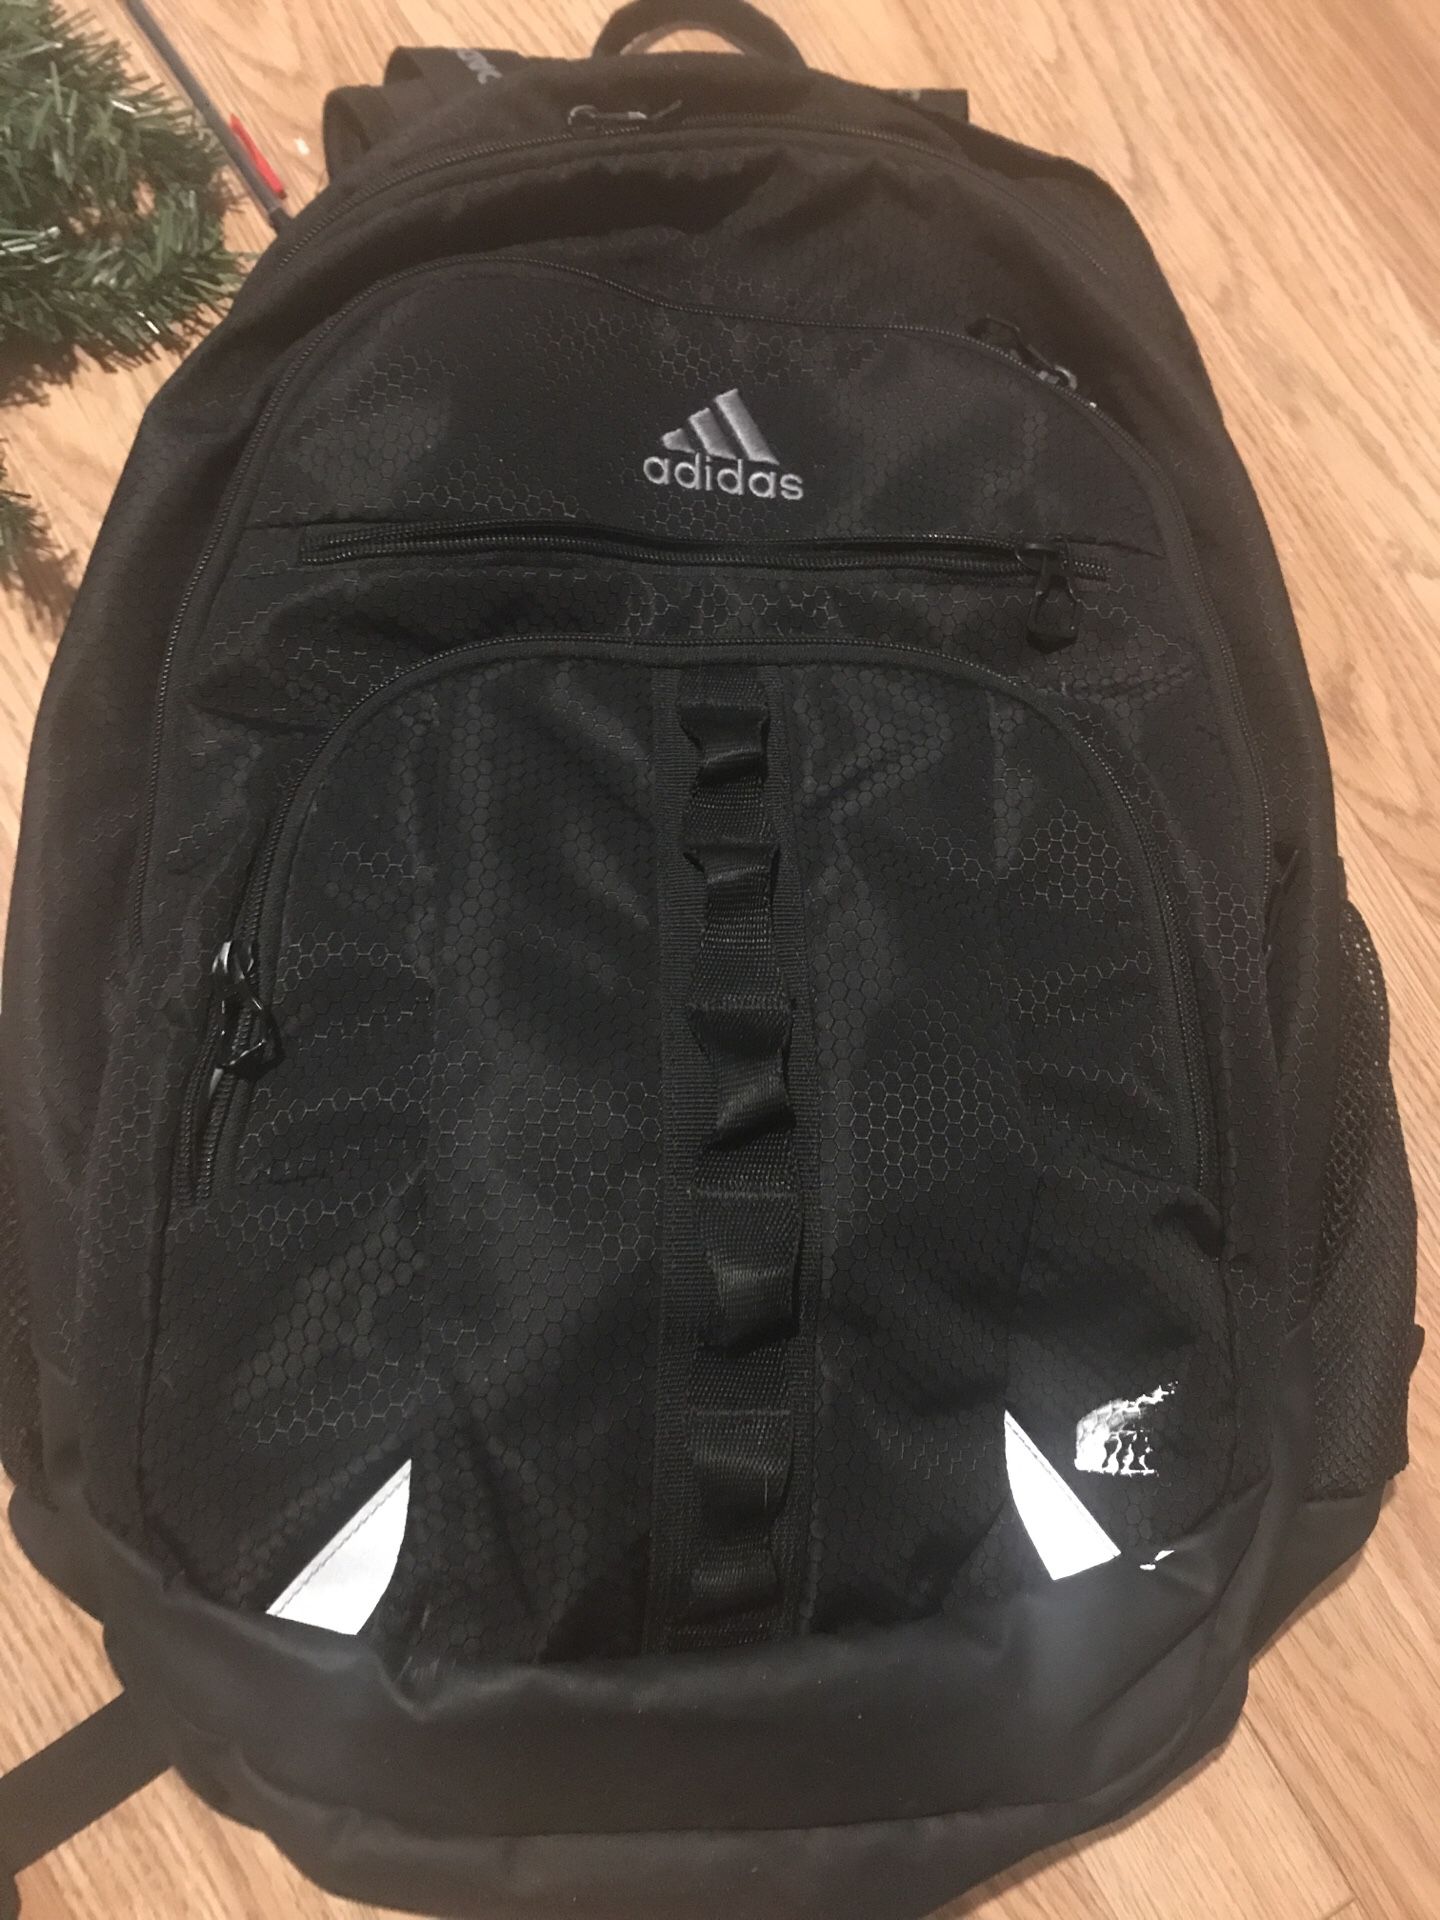 Adidas backpack great condition